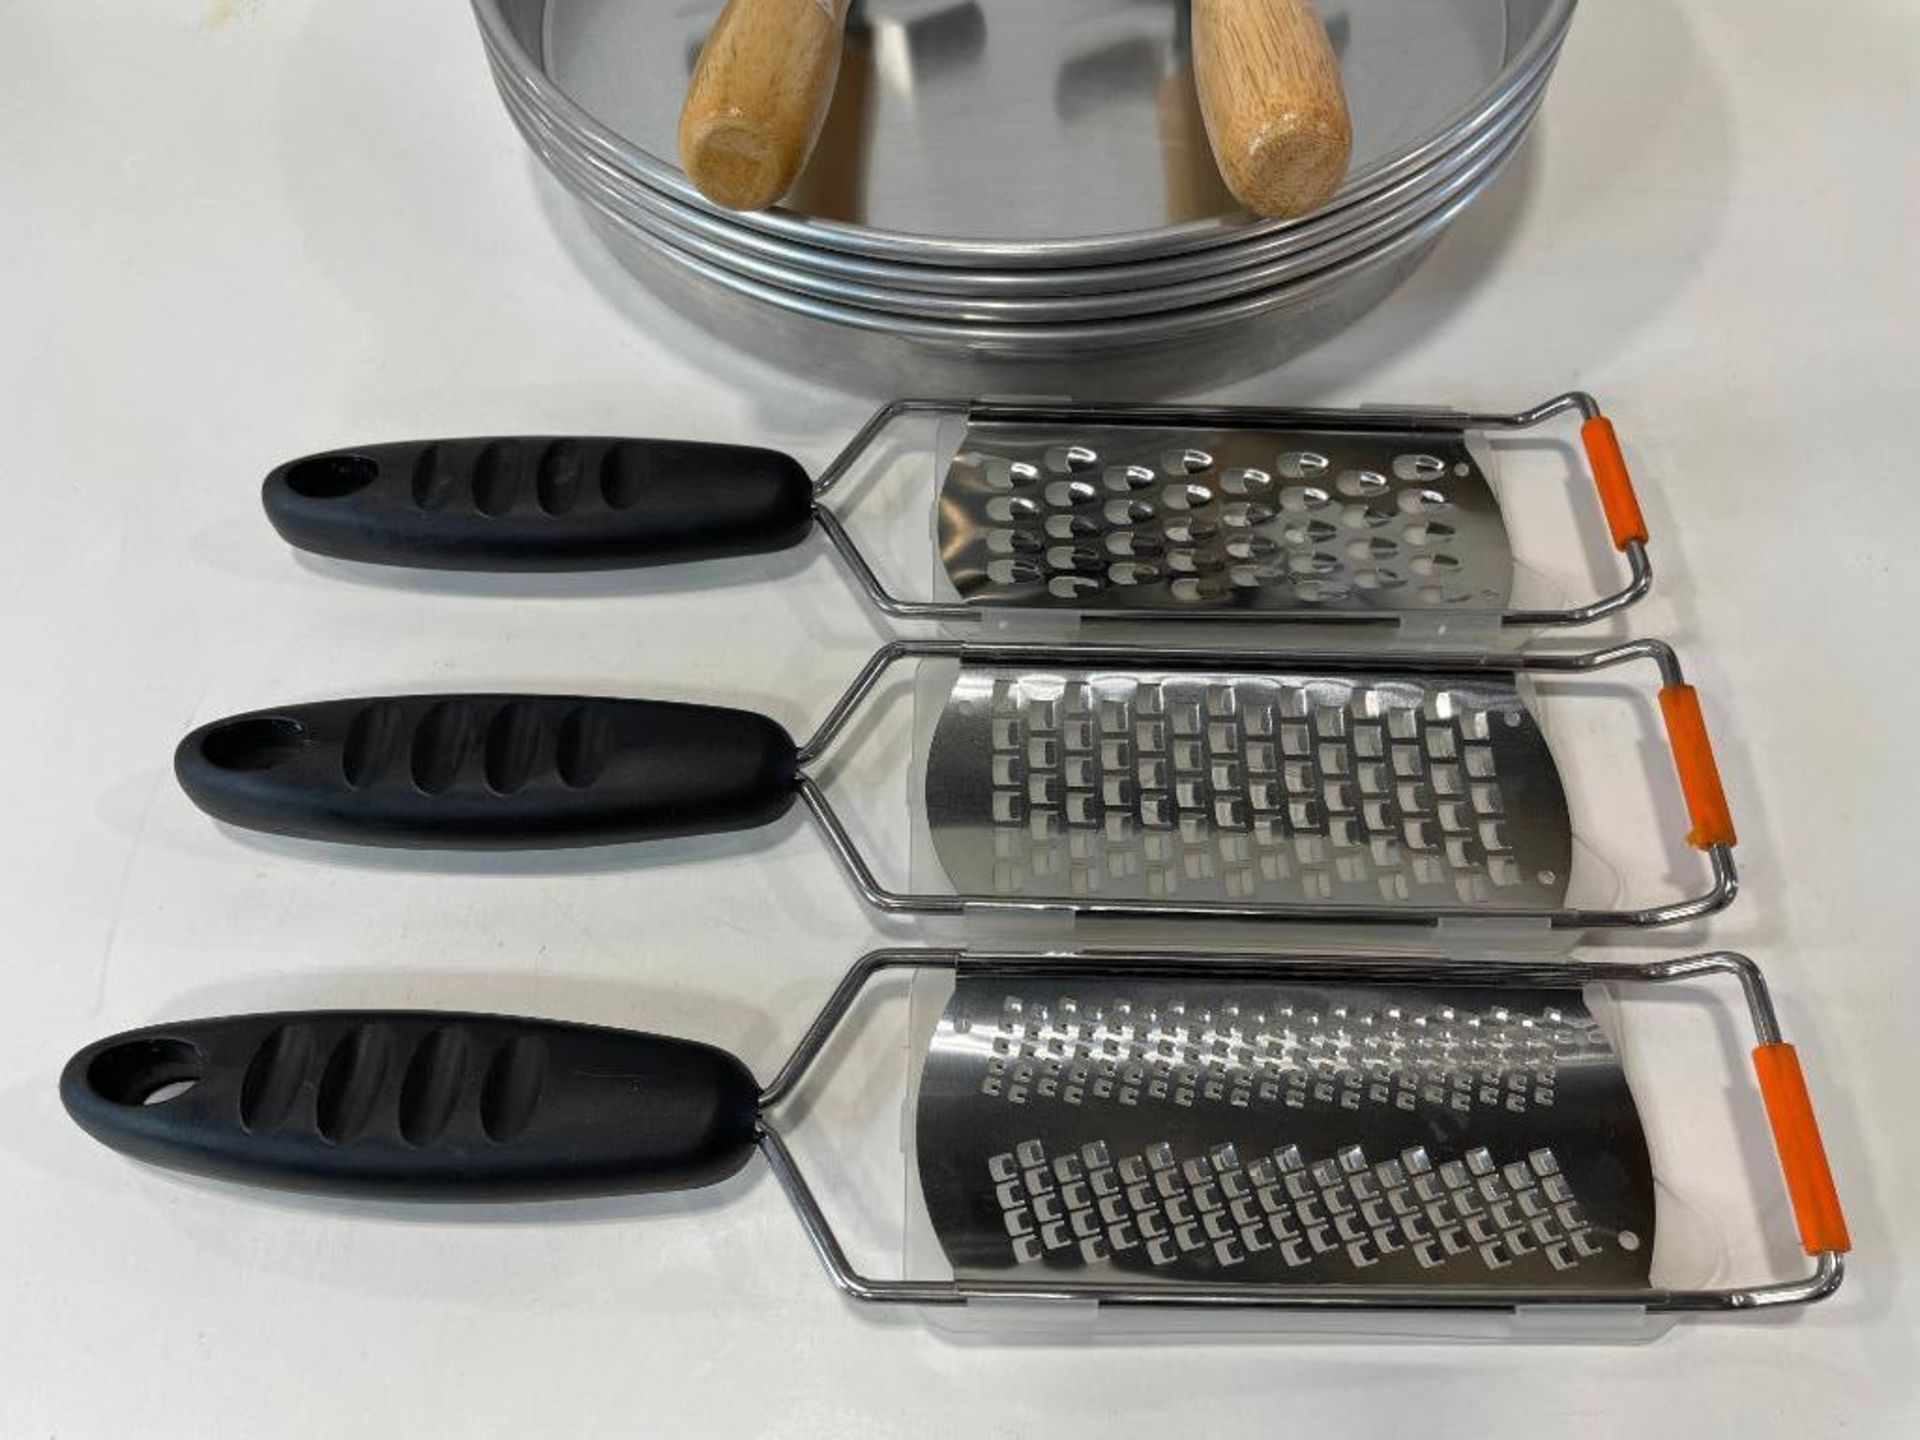 10" PIZZA PAN SET INCLUDING: (4) 15" PIZZA PANS, (2) PIZZA CUTTERS & (3) GRATERS - Image 4 of 6